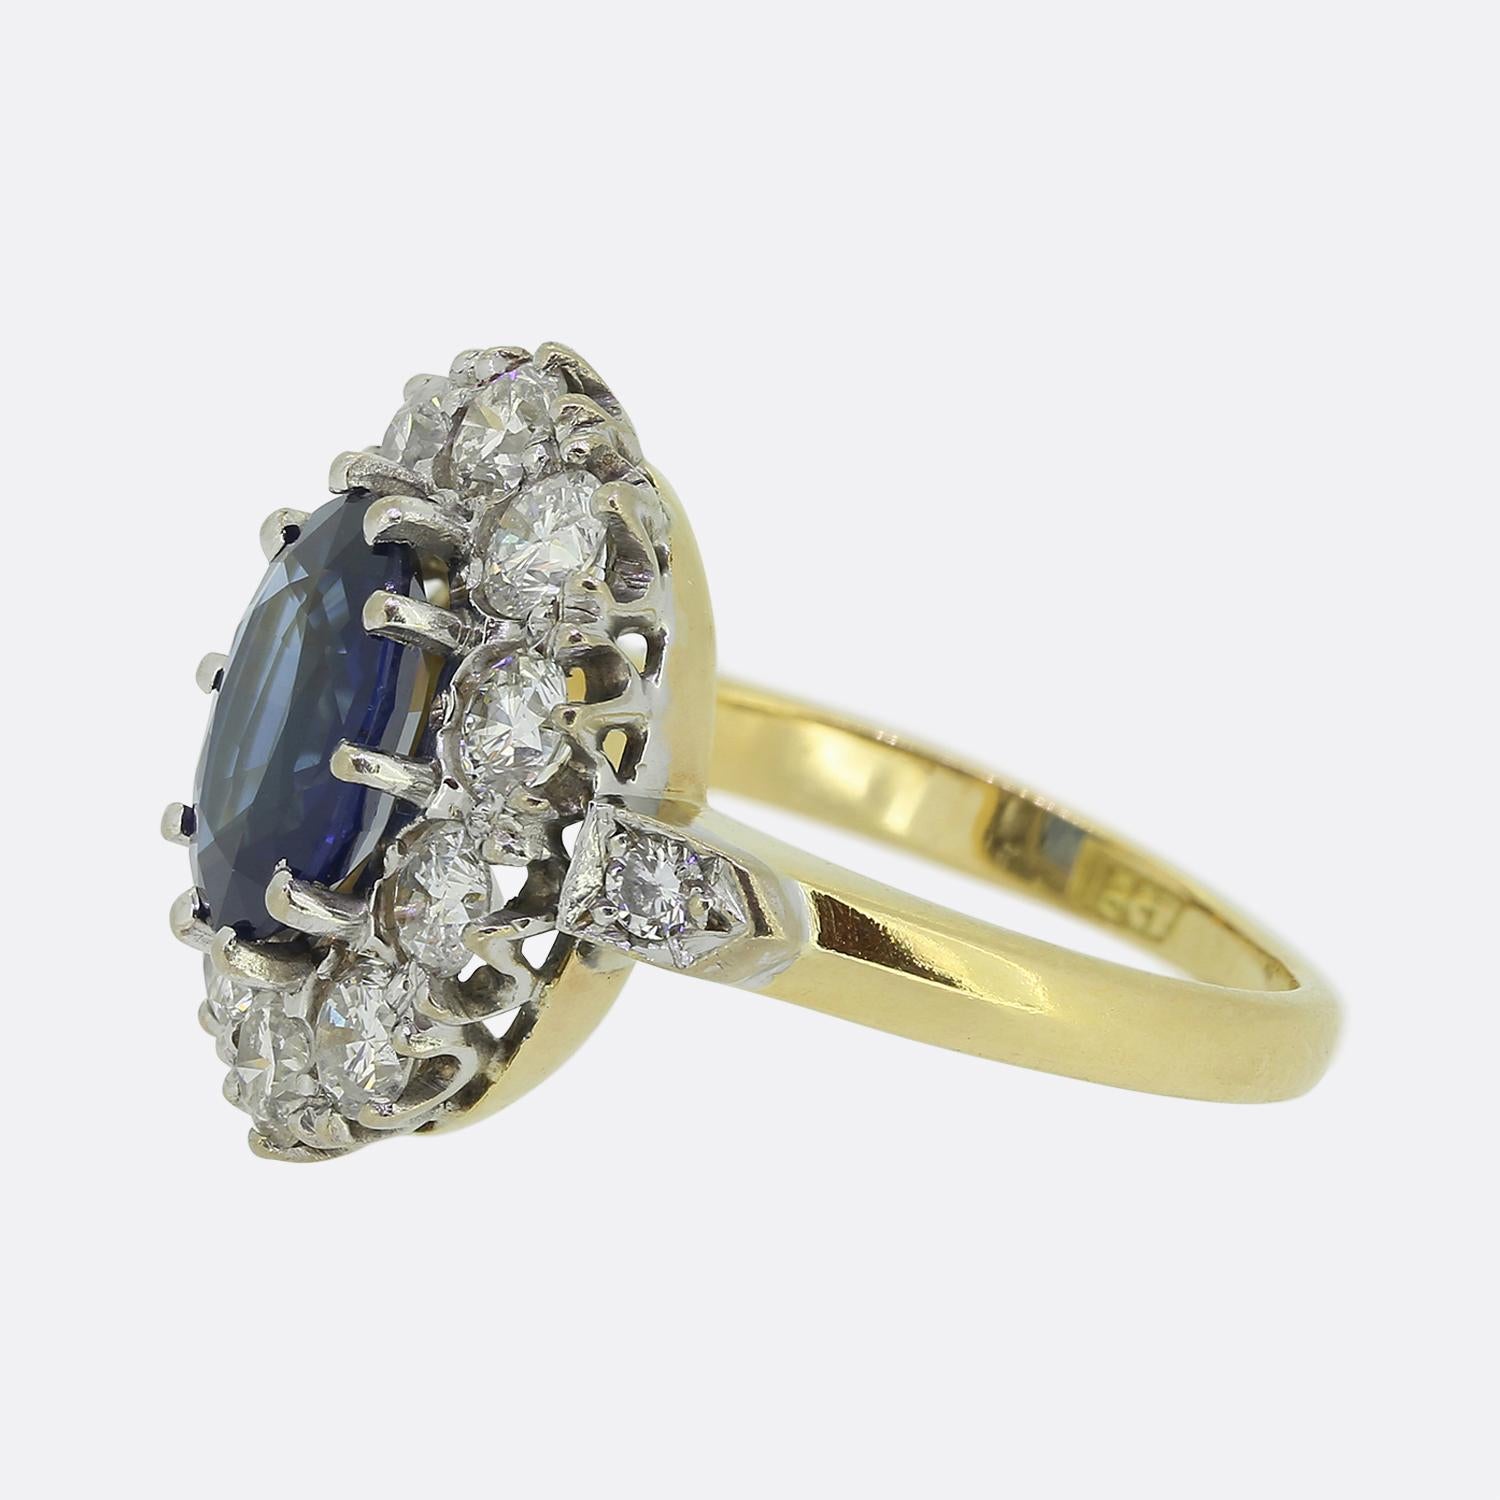 Here we have a stunning sapphire and diamond cluster ring. This vintage ring features a mid to dark blue sapphire that is surrounded by ten round brilliant cut diamonds. It is crafted in 18ct yellow gold with white gold settings for the diamonds and